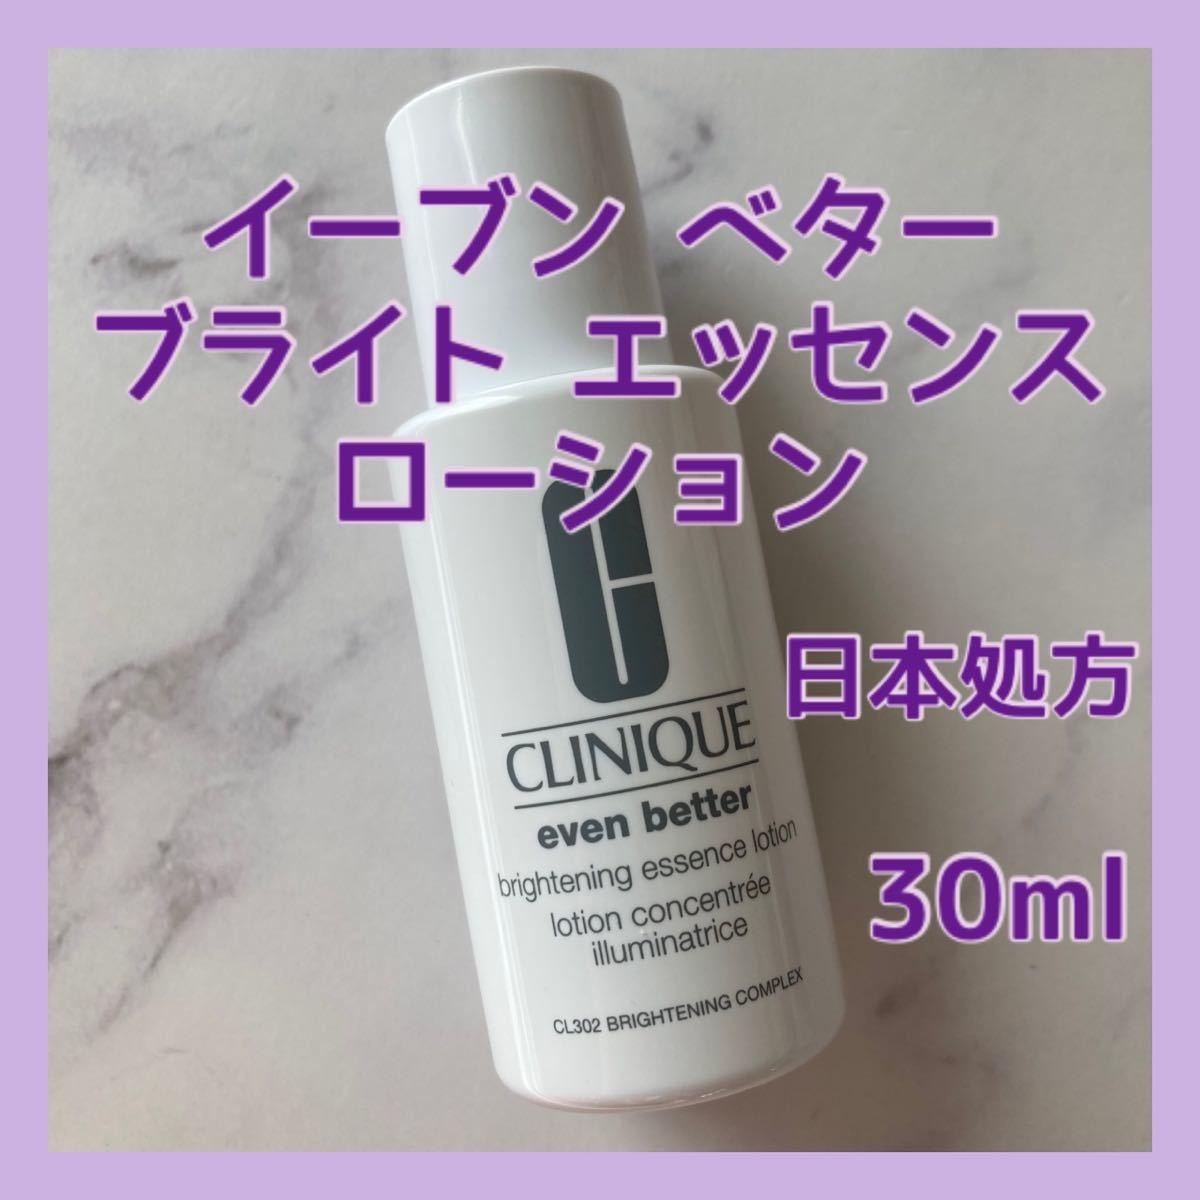  free shipping Japan place person 30ml Clinique i-bn betta - bright essence lotion face lotion b lightning 